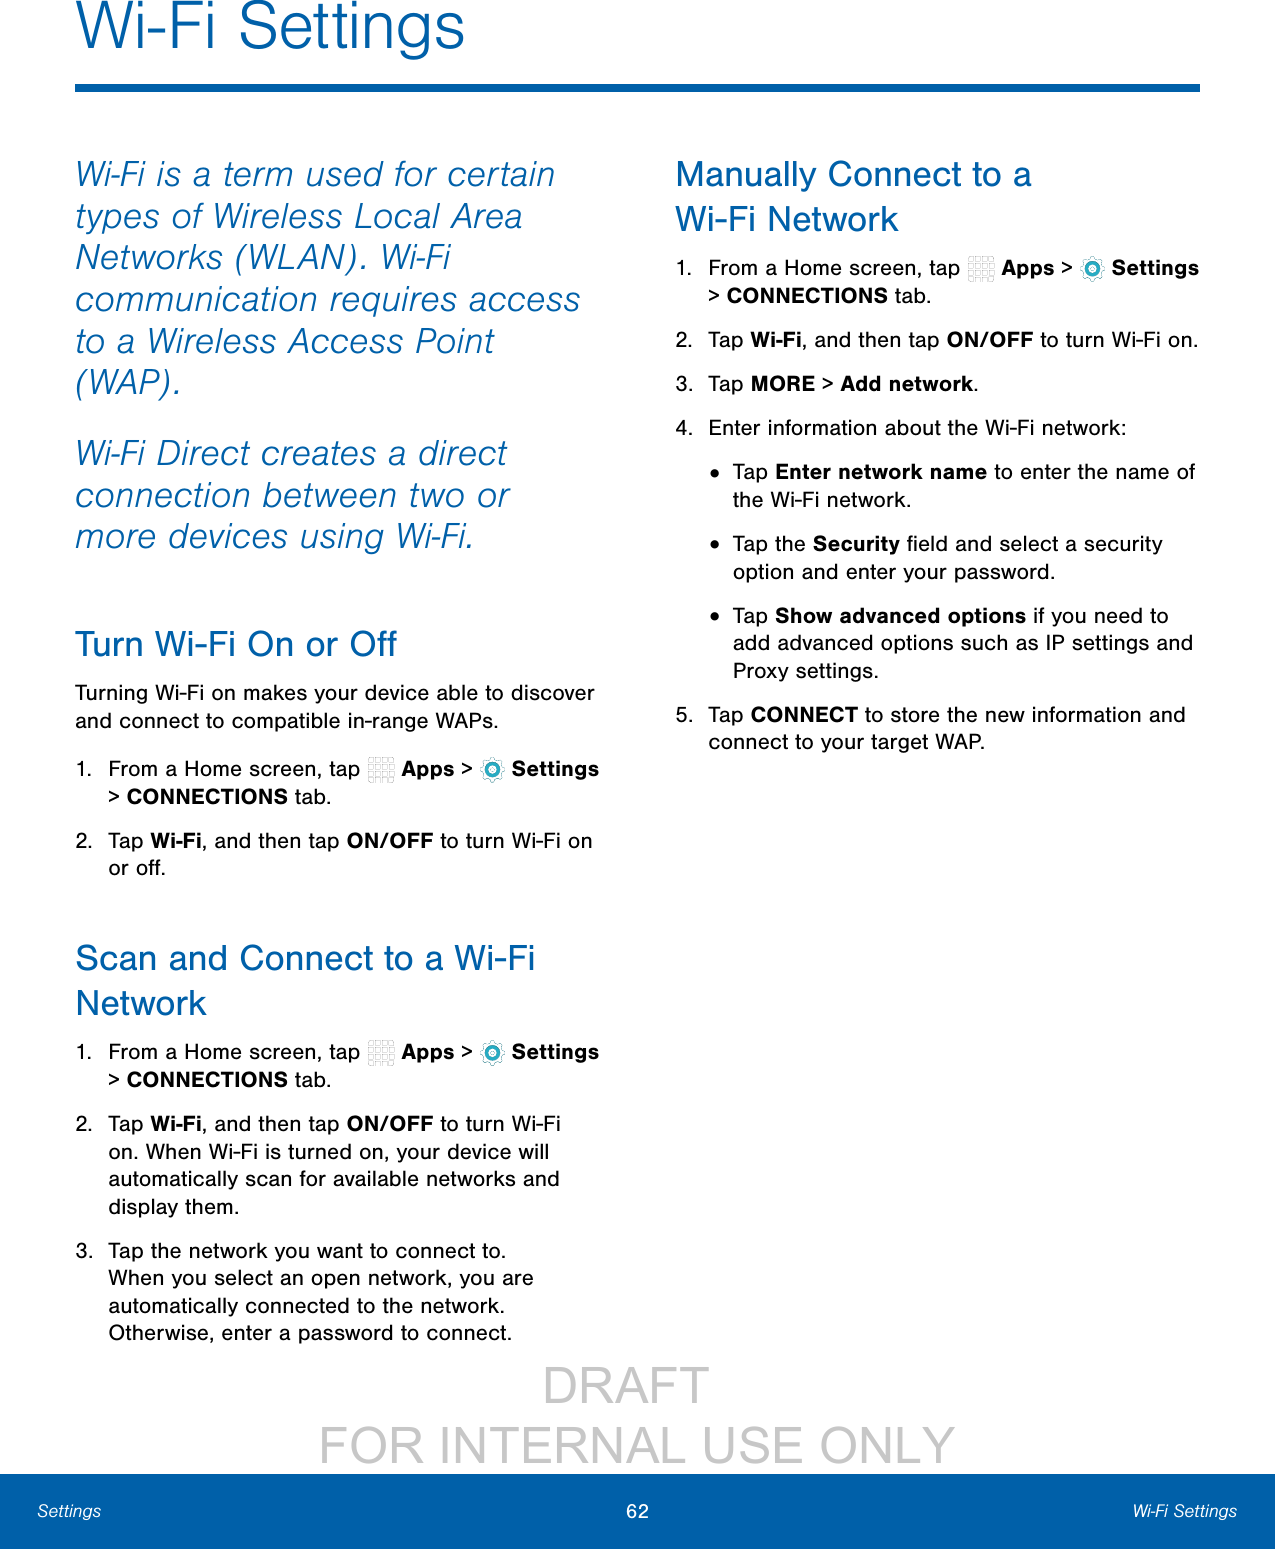                 DRAFT FOR INTERNAL USE ONLY62 Wi-Fi SettingsSettingsWi-Fi is a term used for certain types of Wireless Local Area Networks (WLAN). Wi-Fi communication requires access to a Wireless Access Point (WAP).Wi-Fi Direct creates a direct connection between two or more devices using Wi-Fi. Turn Wi-Fi On or OﬀTurning Wi-Fi on makes your device able to discover and connect to compatible in-range WAPs.1.  From a Home screen, tap   Apps &gt;  Settings &gt; CONNECTIONS tab.2.  Tap Wi-Fi, and then tap ON/OFF to turn Wi-Fi on or oﬀ.Scan and Connect to a Wi-Fi Network1.  From a Home screen, tap   Apps &gt;  Settings &gt; CONNECTIONS tab.2.  Tap Wi-Fi, and then tap ON/OFF to turn Wi-Fi on. When Wi-Fi is turned on, your device will automatically scan for available networks and display them.3.  Tap the network you want to connect to. When you select an open network, you are automatically connected to the network. Otherwise, enter a password to connect.Manually Connect to a Wi-FiNetwork1.  From a Home screen, tap   Apps &gt;  Settings &gt; CONNECTIONS tab.2.  Tap Wi-Fi, and then tap ON/OFF to turn Wi-Fi on.3.  Tap MORE &gt; Addnetwork.4.  Enter information about the Wi-Fi network:•  Tap Enter network name to enter the name of the Wi-Fi network.•  Tap the Security ﬁeld and select a security option and enter your password.•  Tap Show advanced options if you need to add advanced options such as IPsettings and Proxy settings.5.  Tap CONNECT to store the new information and connect to your target WAP.Wi-Fi Settings